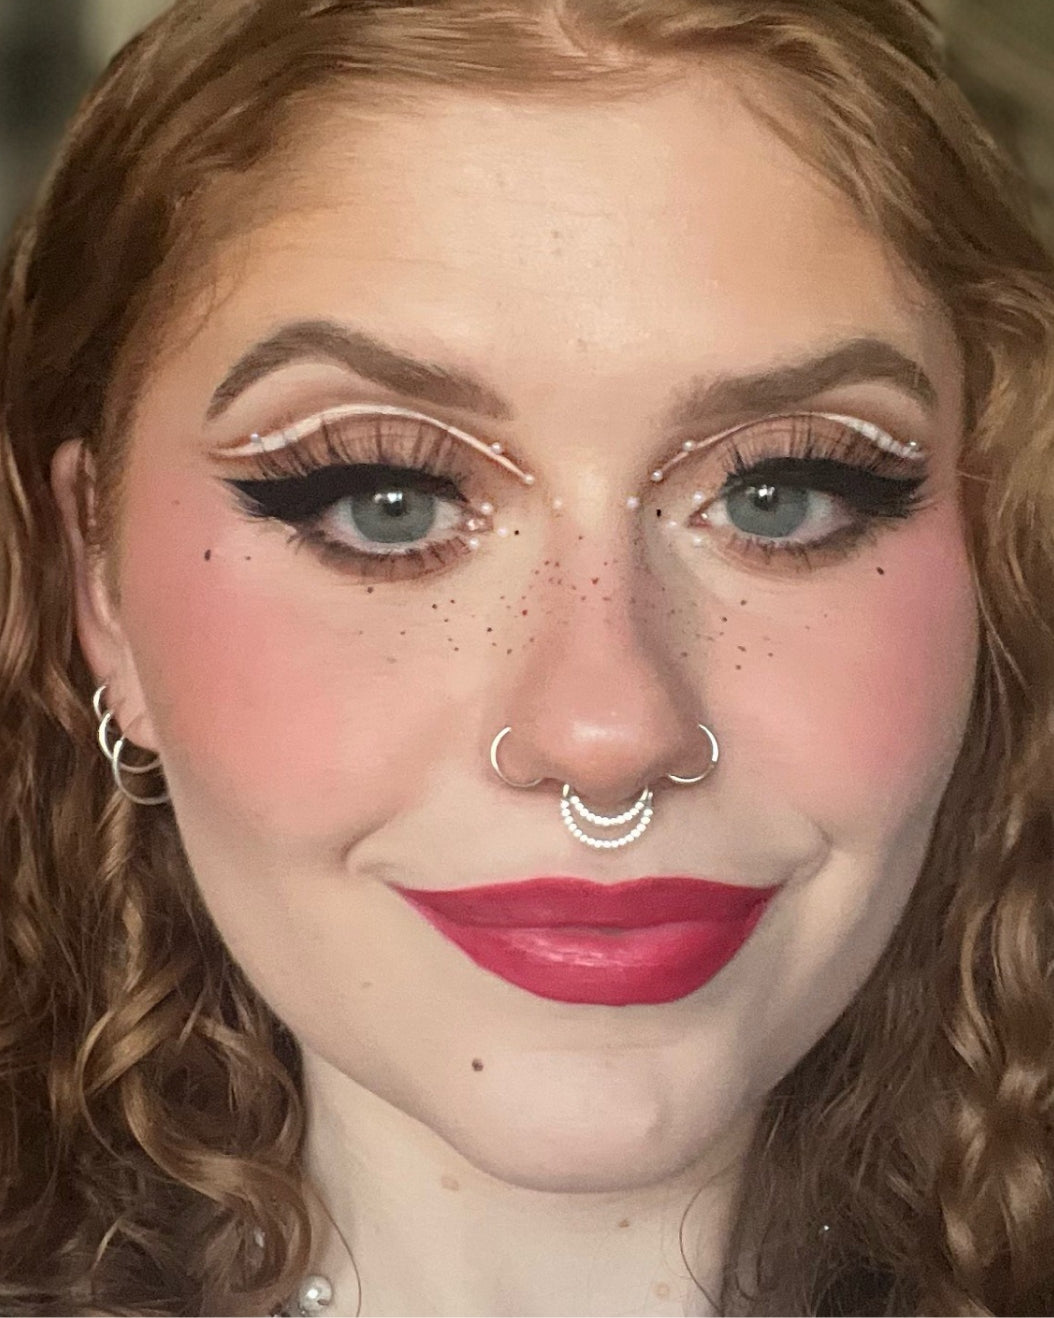 Photo of a person with red lipstick and graphic eye makeup with pearls.